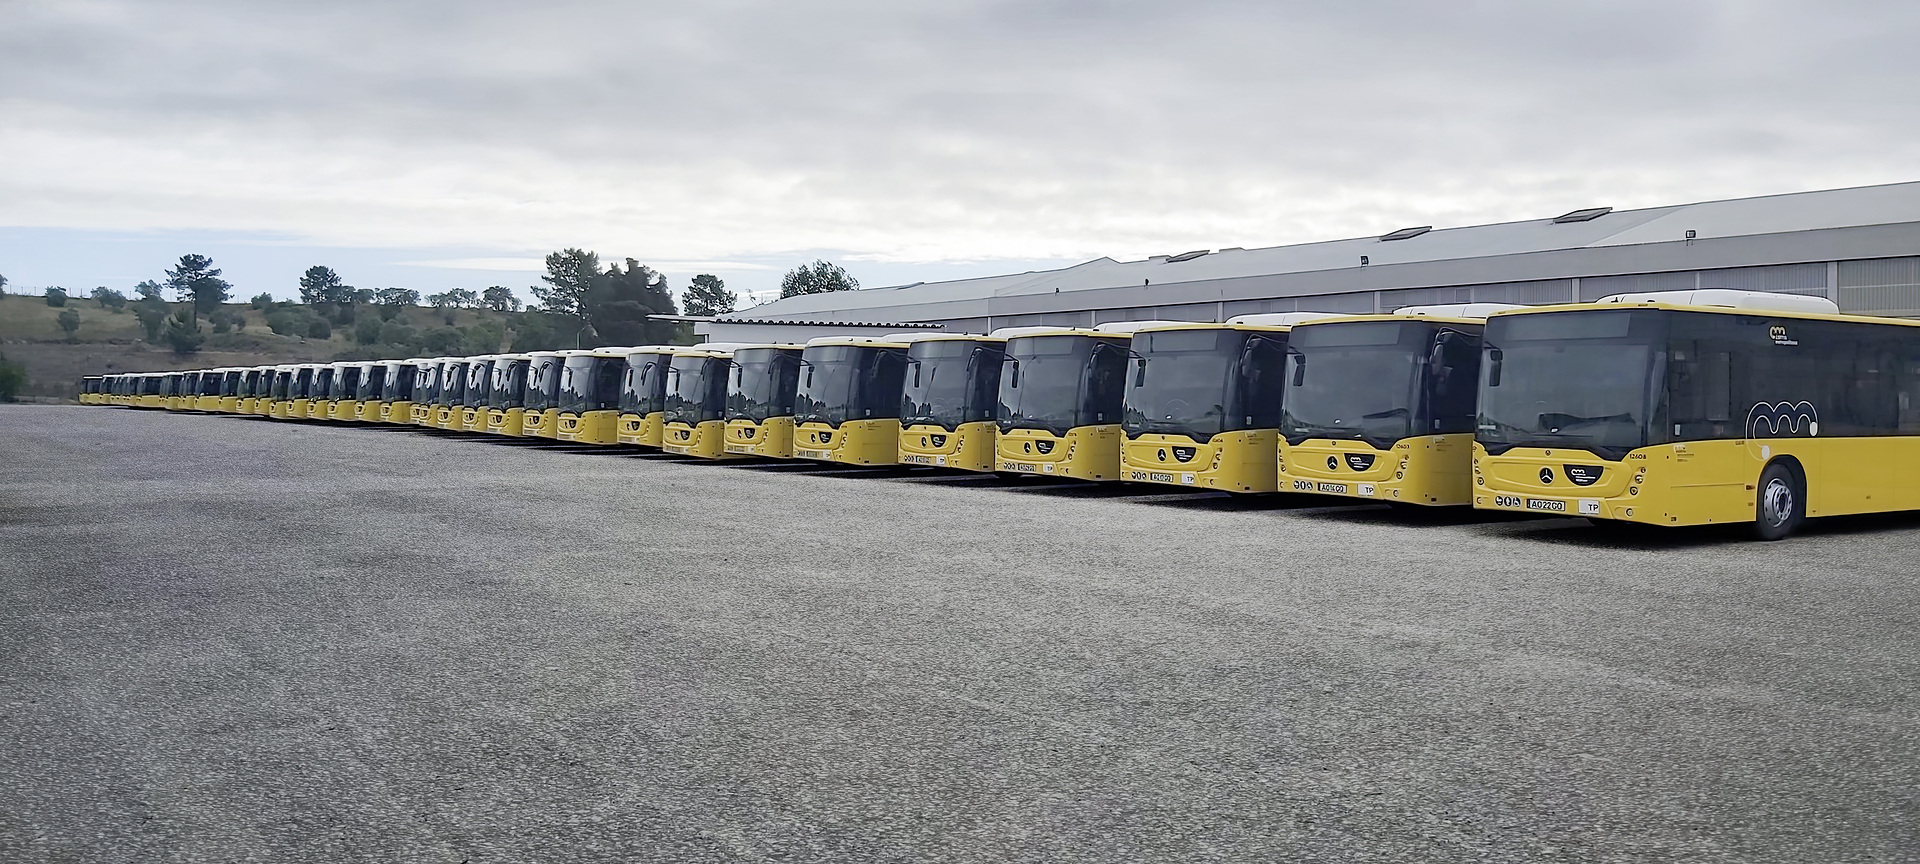 Record order from Portugal: Daimler Buses has delivered 864 buses to the Área Metropolitana de Lisboa (AML), the region surrounding the country's capital Lisbon